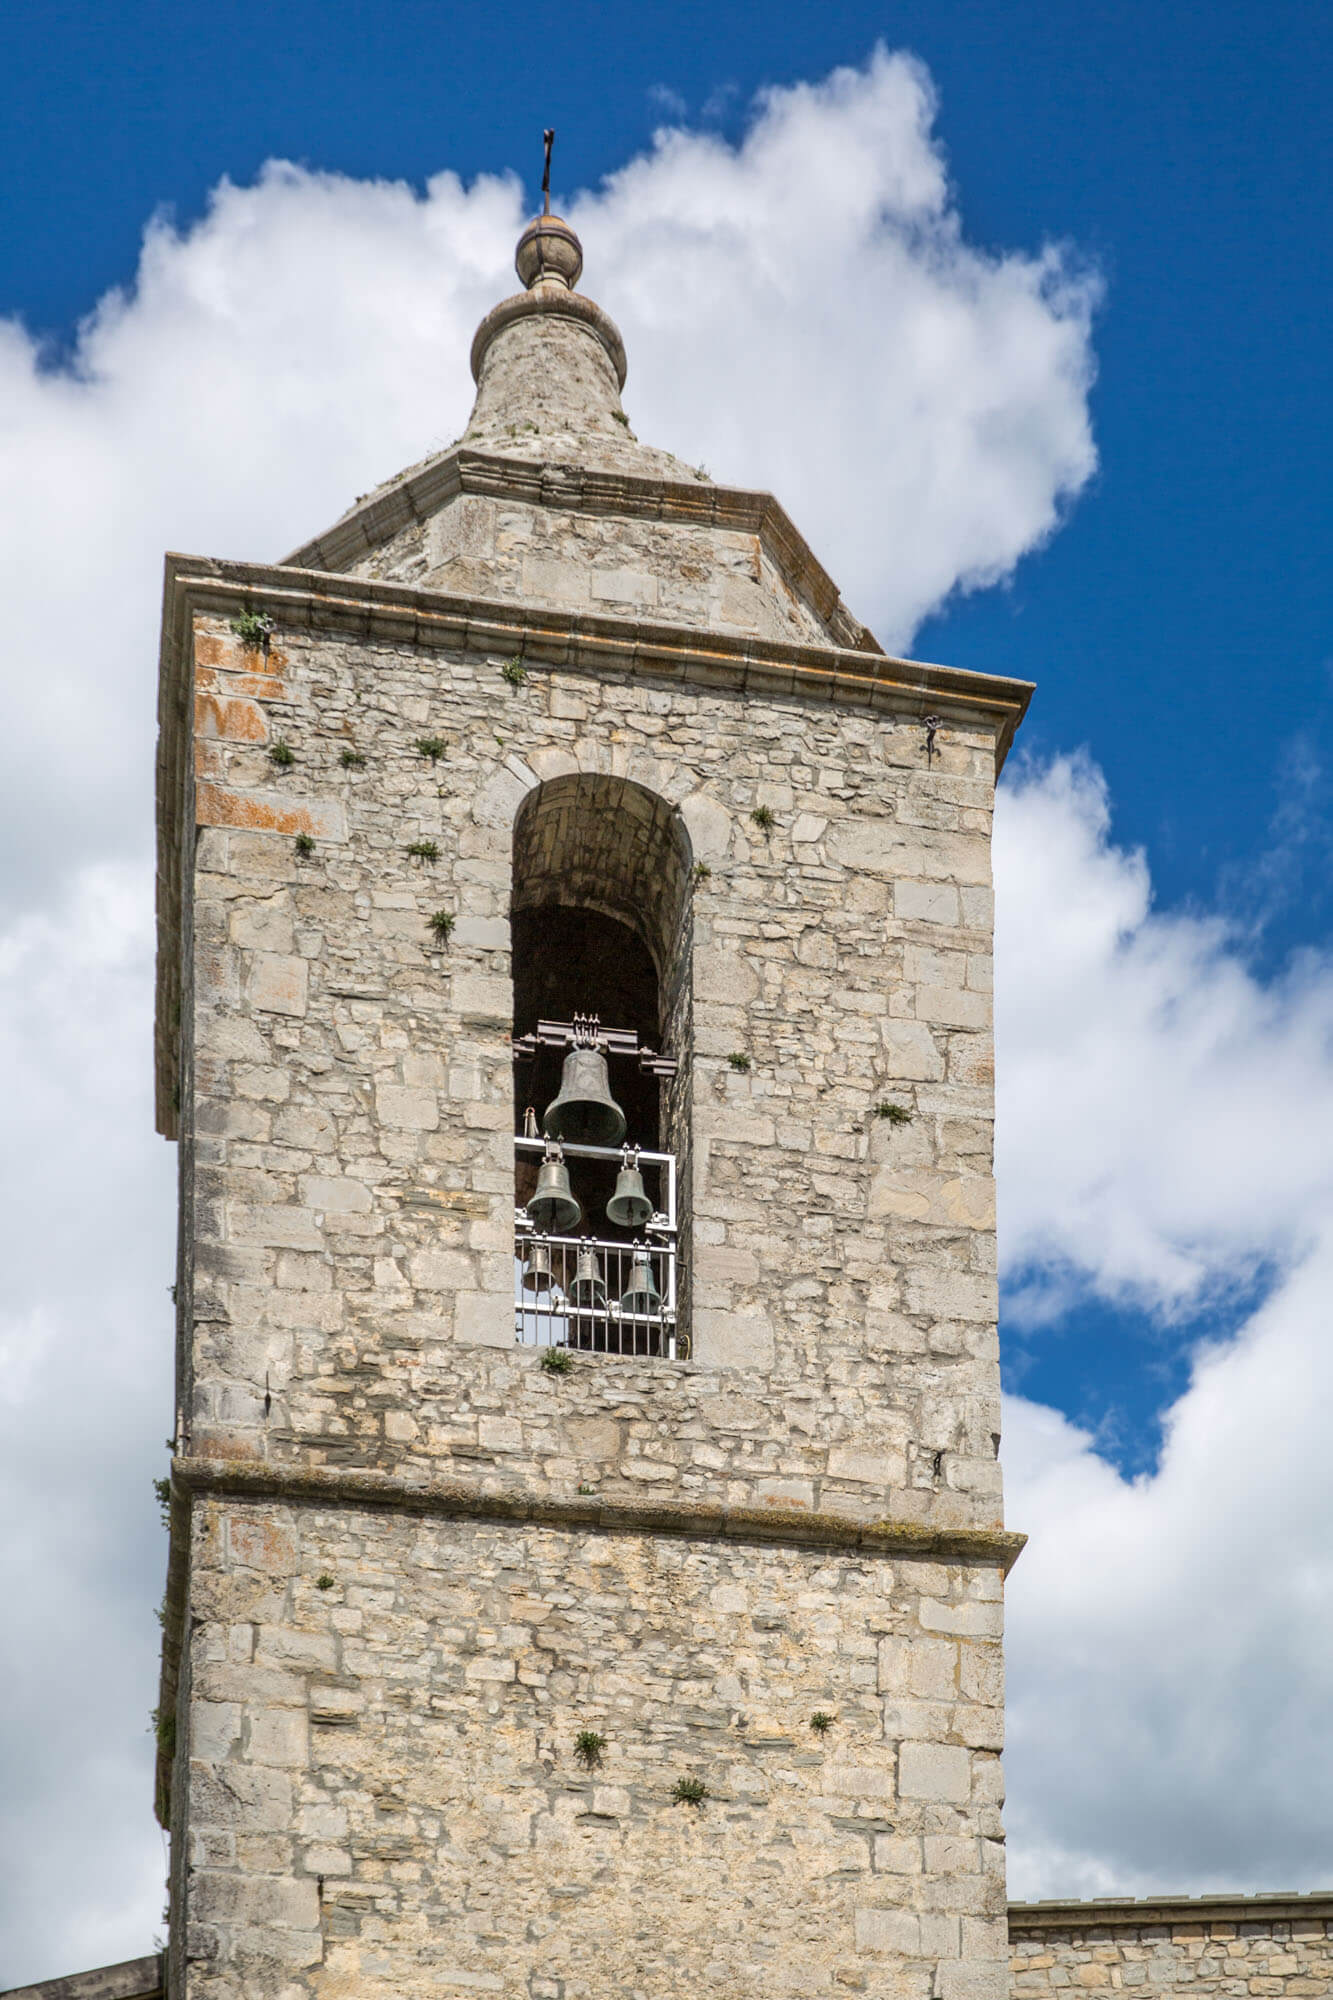 A stone belltower in Agnone, Italy, where a foundry has been producing bells for nearly a millennium